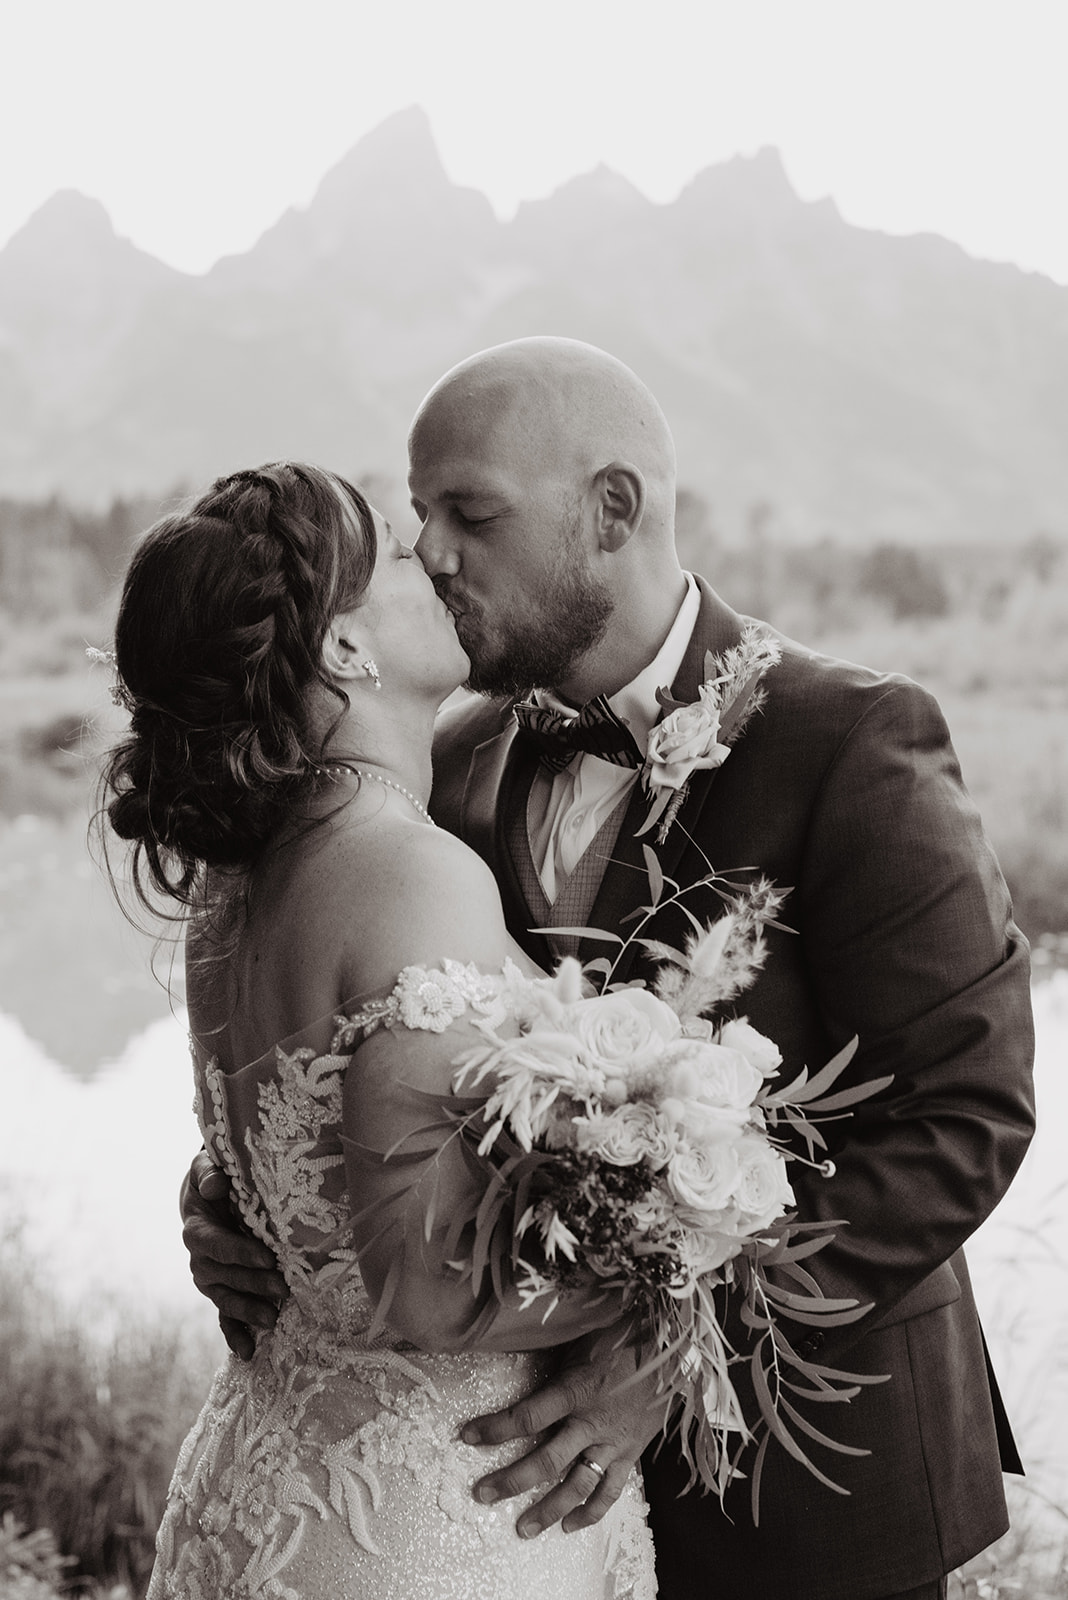 black and white wedding image of bride and groom kissing and embracing each other at Oxbow Bend for their wedding photos with the GR and Tetons behind them and reflecting in the water